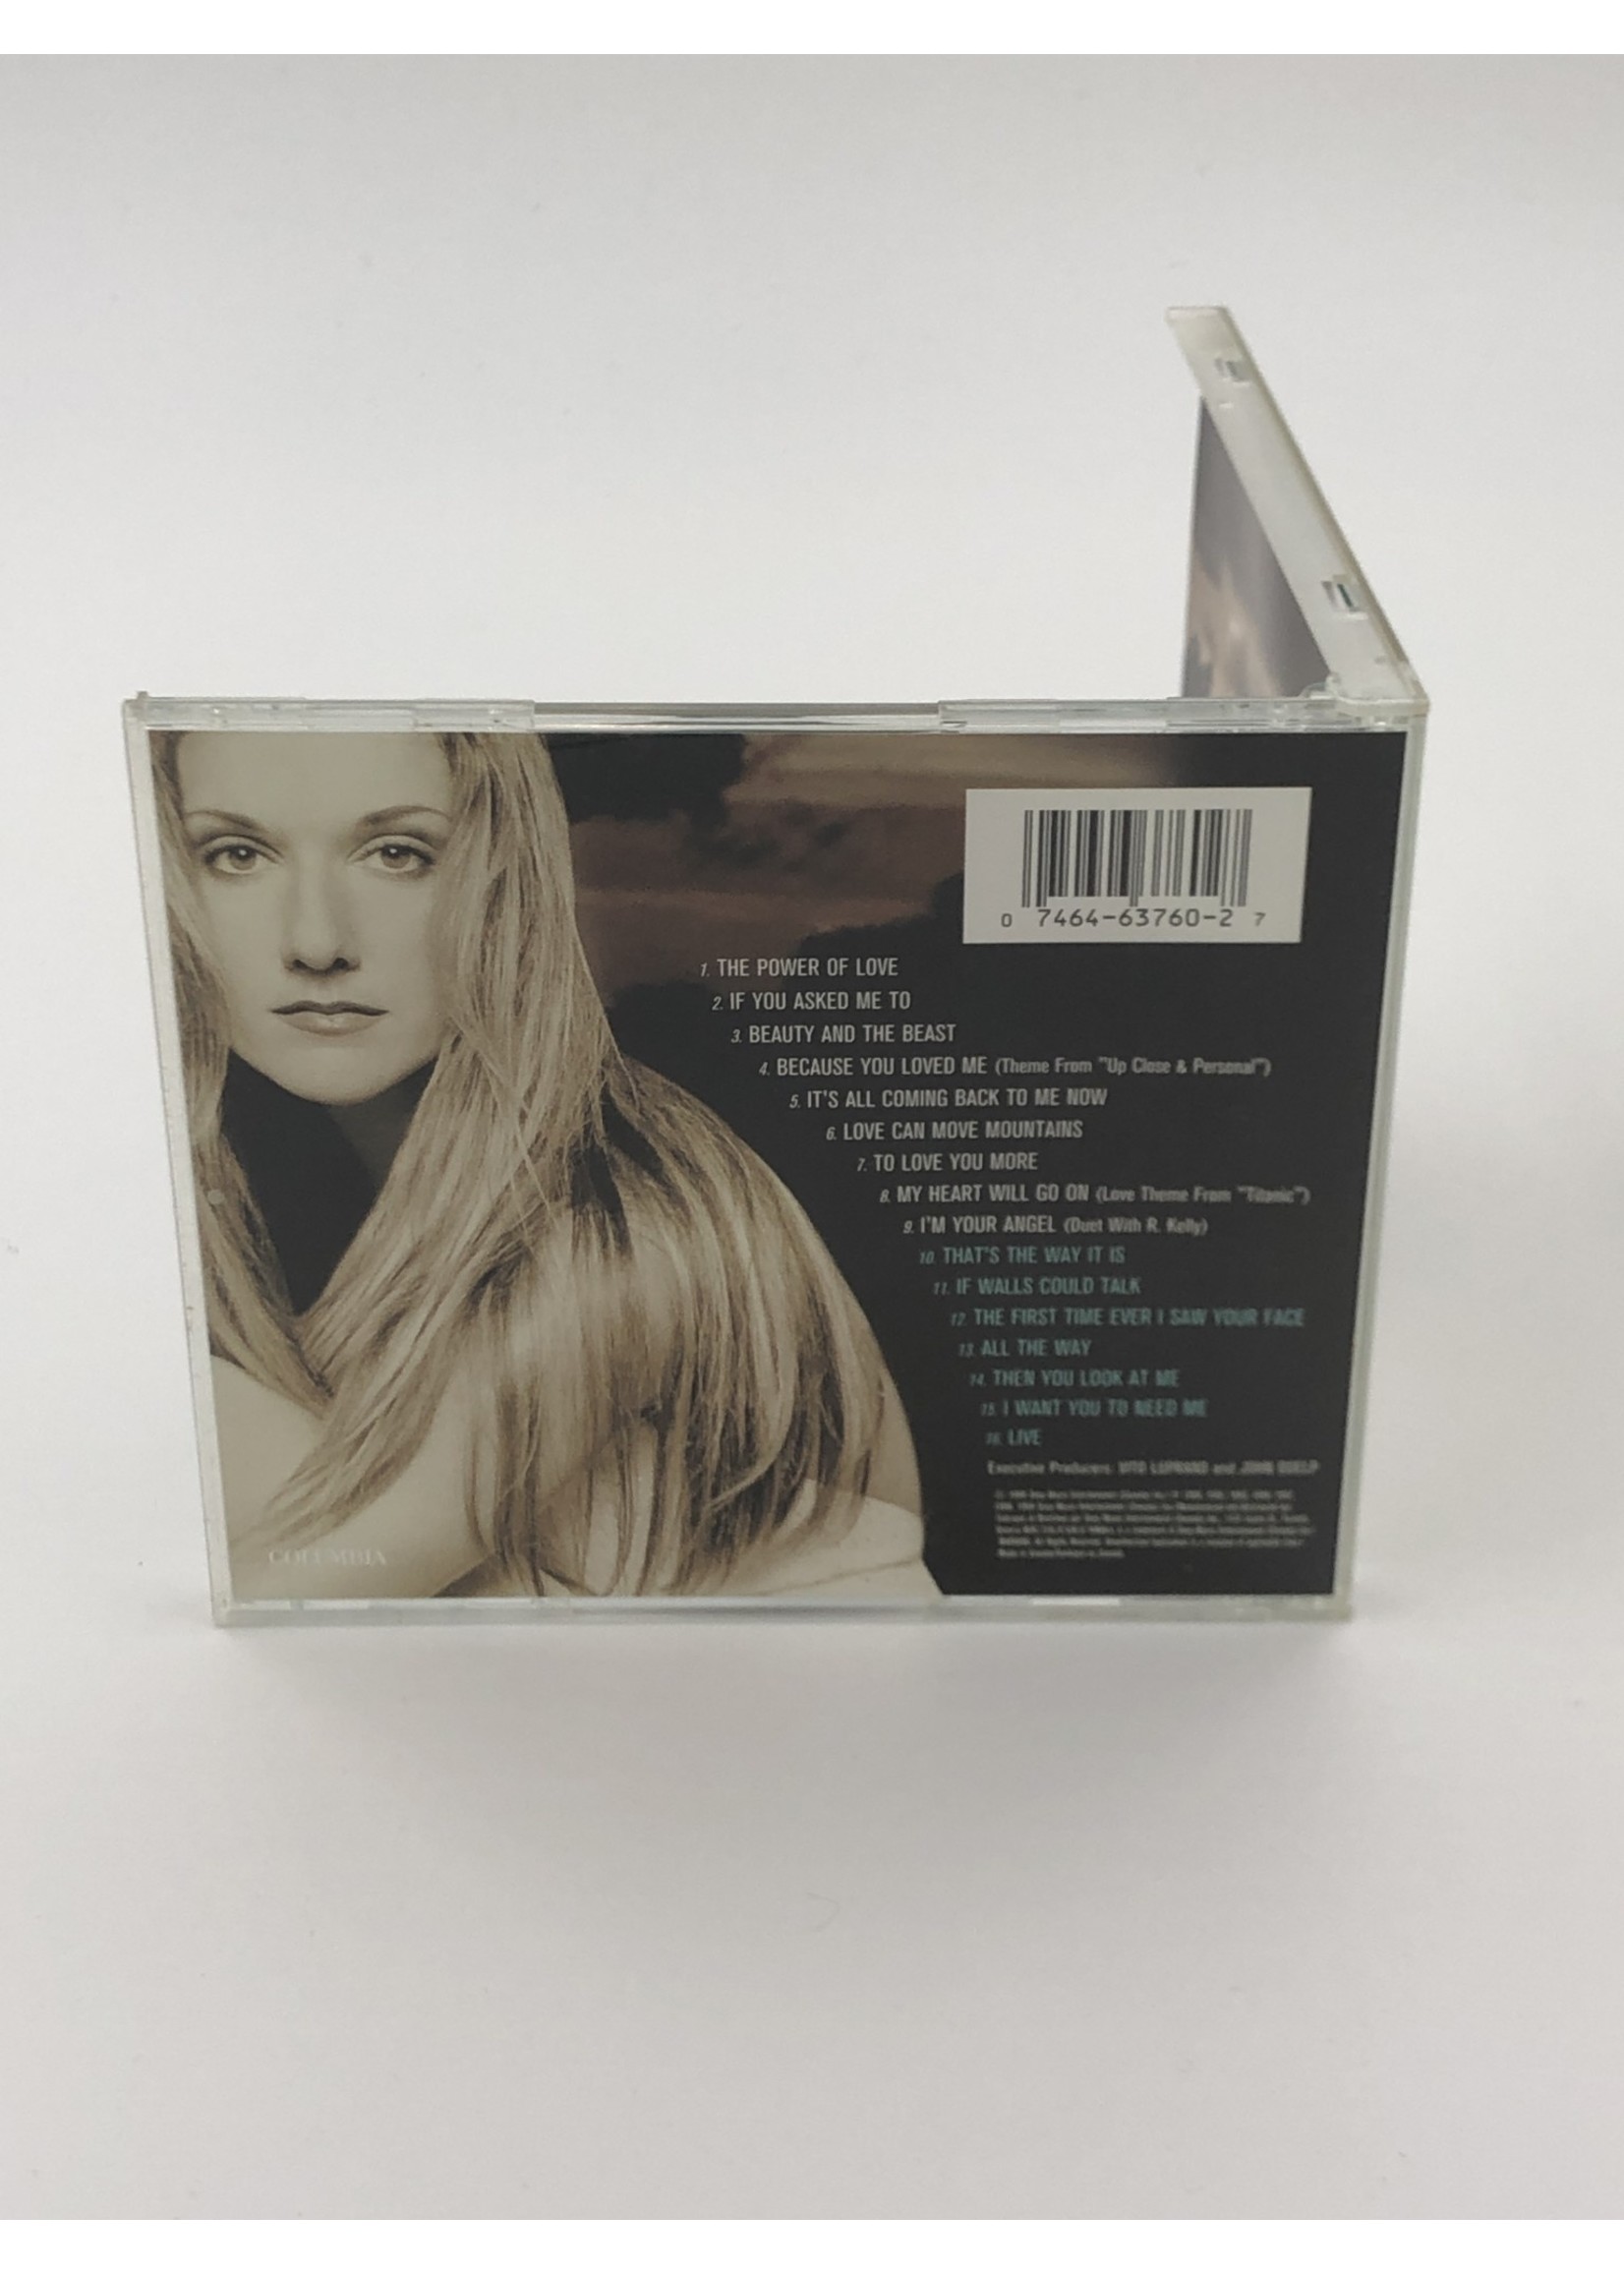 CD Celine Dion: All the Way...A Decade of Song CD